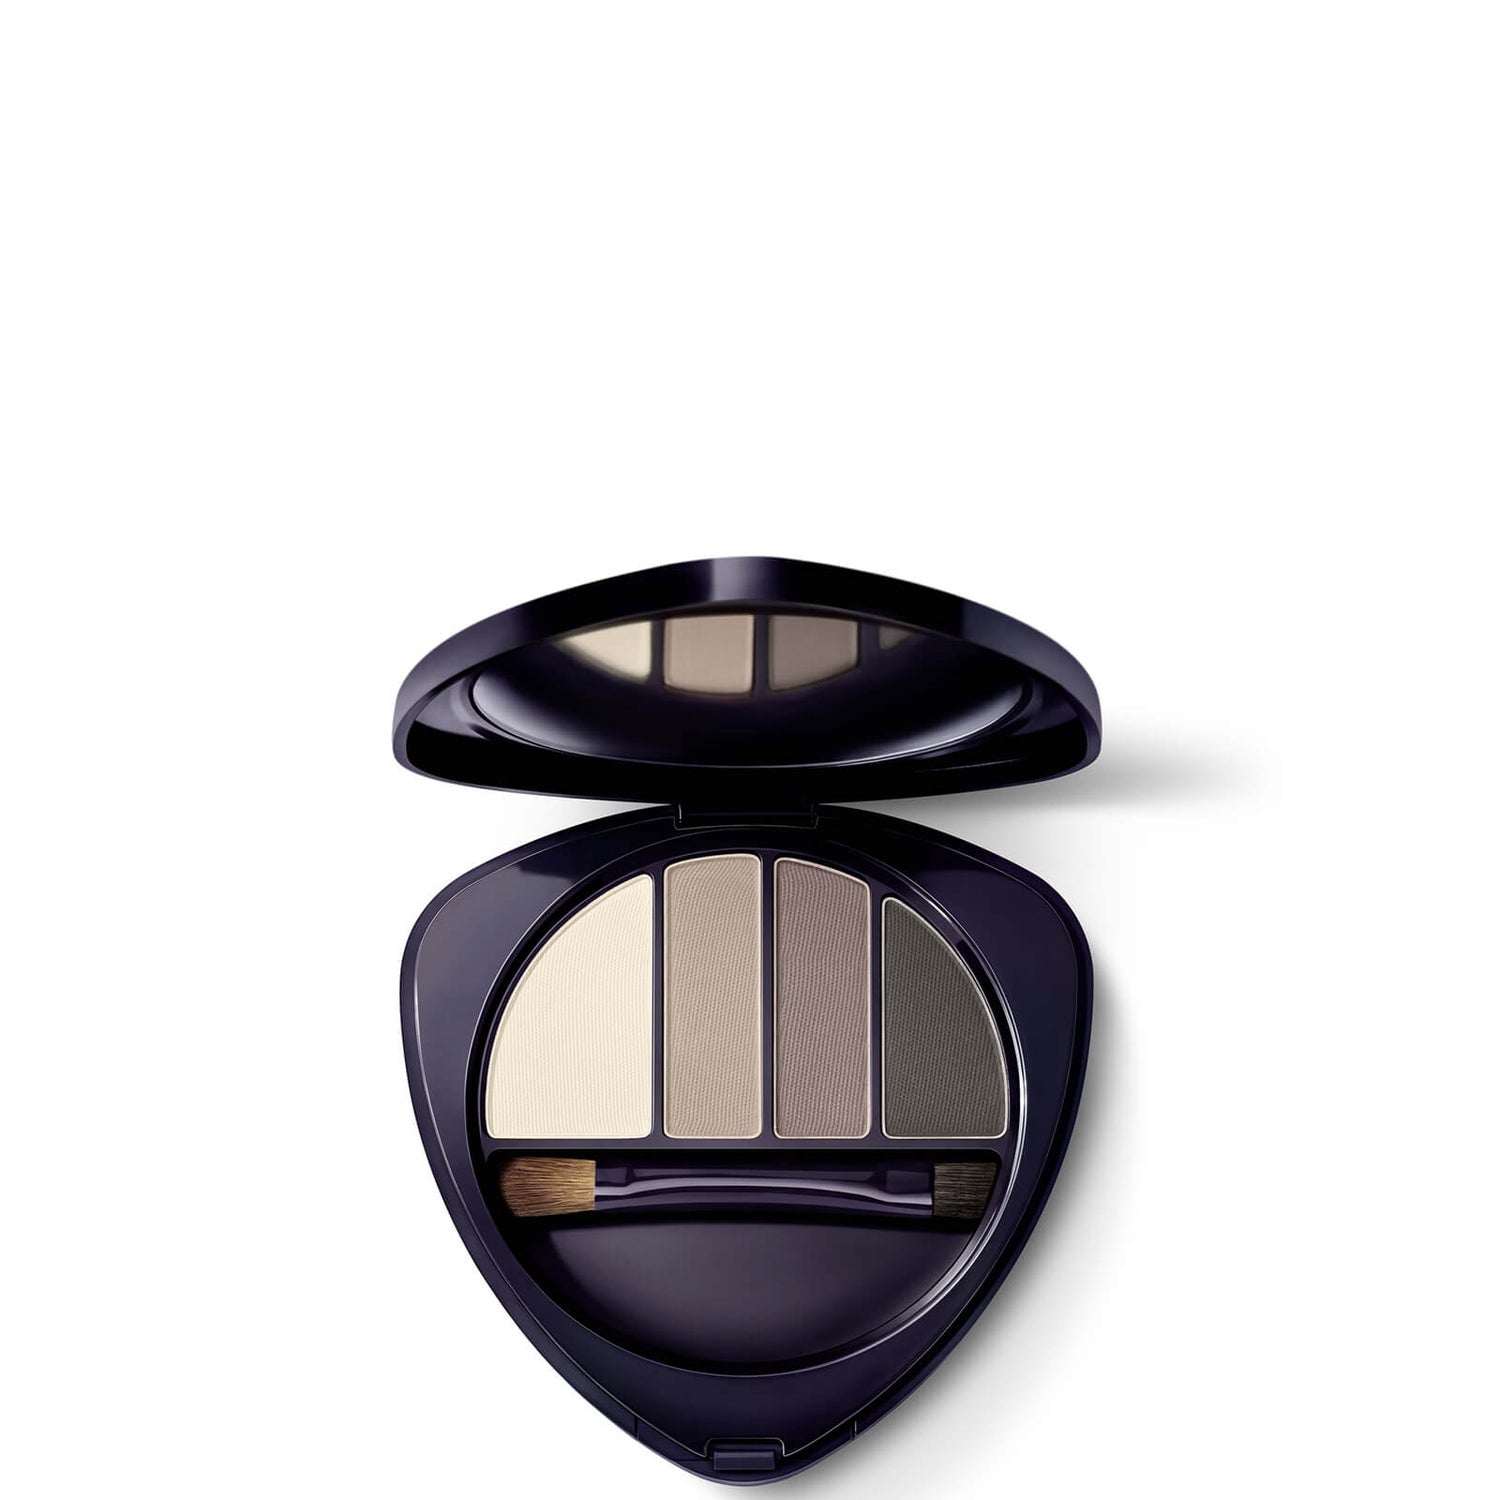 Dr. Hauschka Eye and Brow Palette - 01 Stone